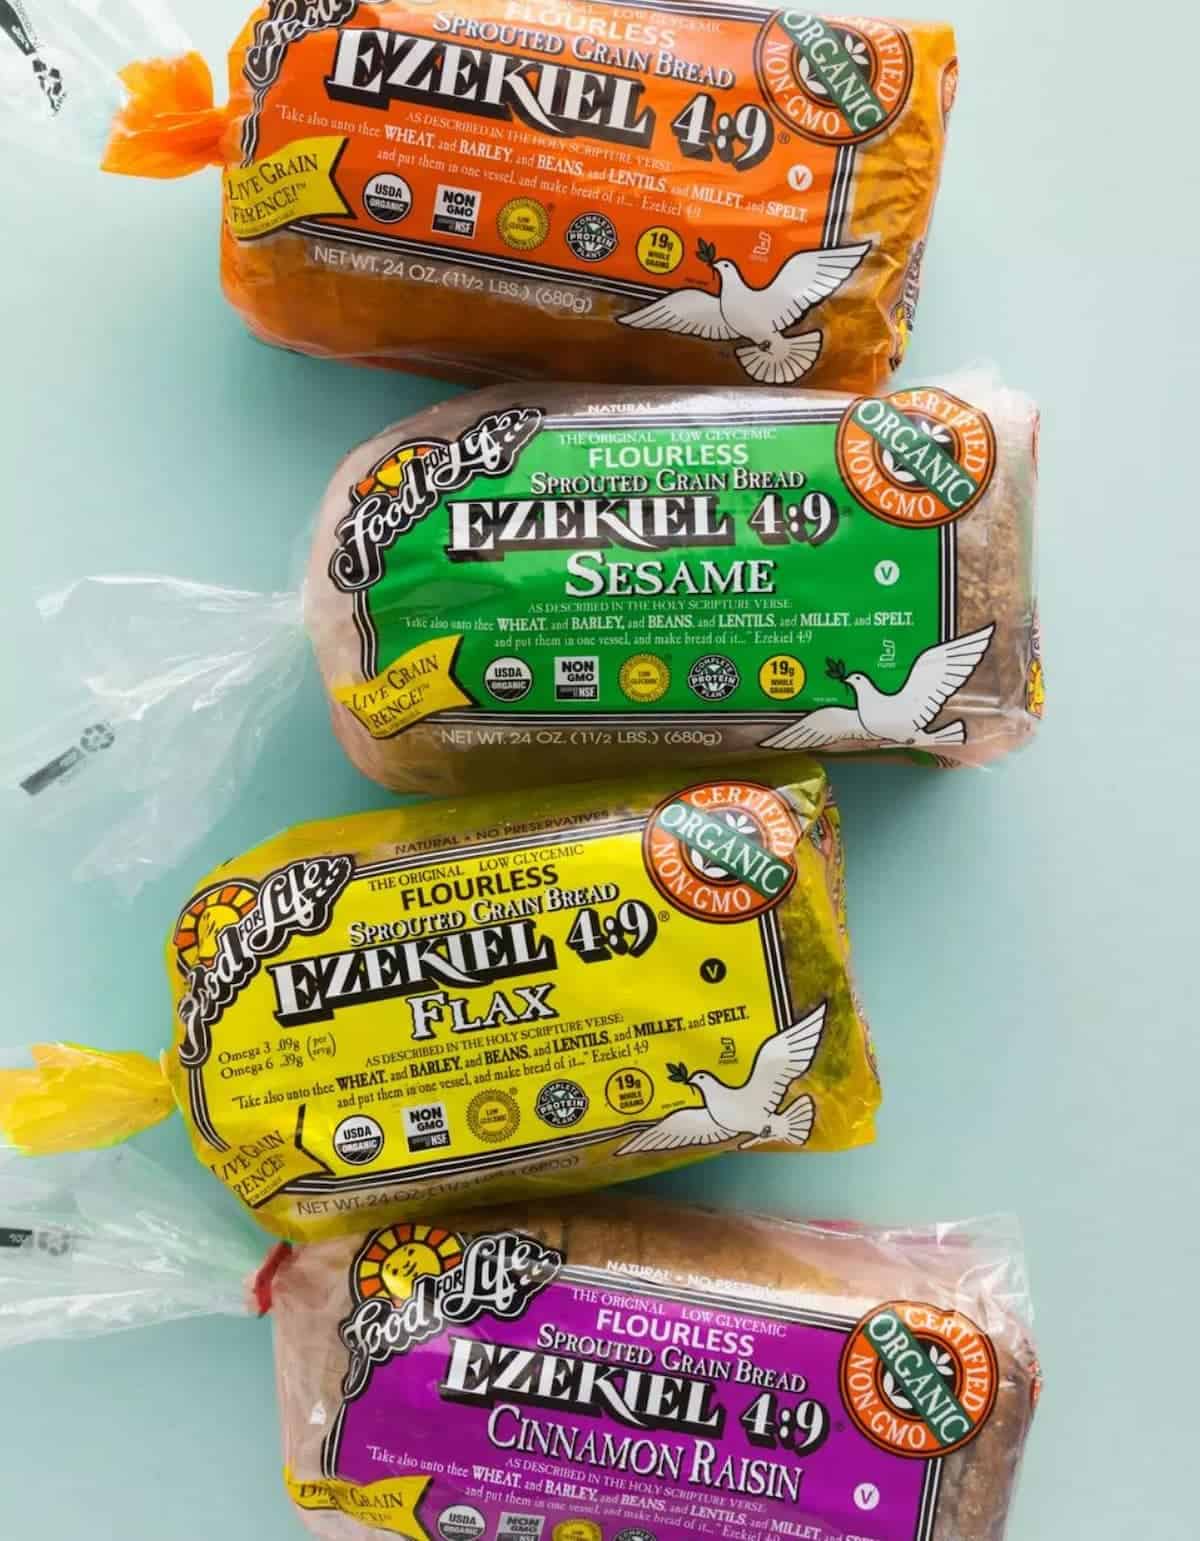 Packages of Food for Life Ezekiel Sprouted bread.